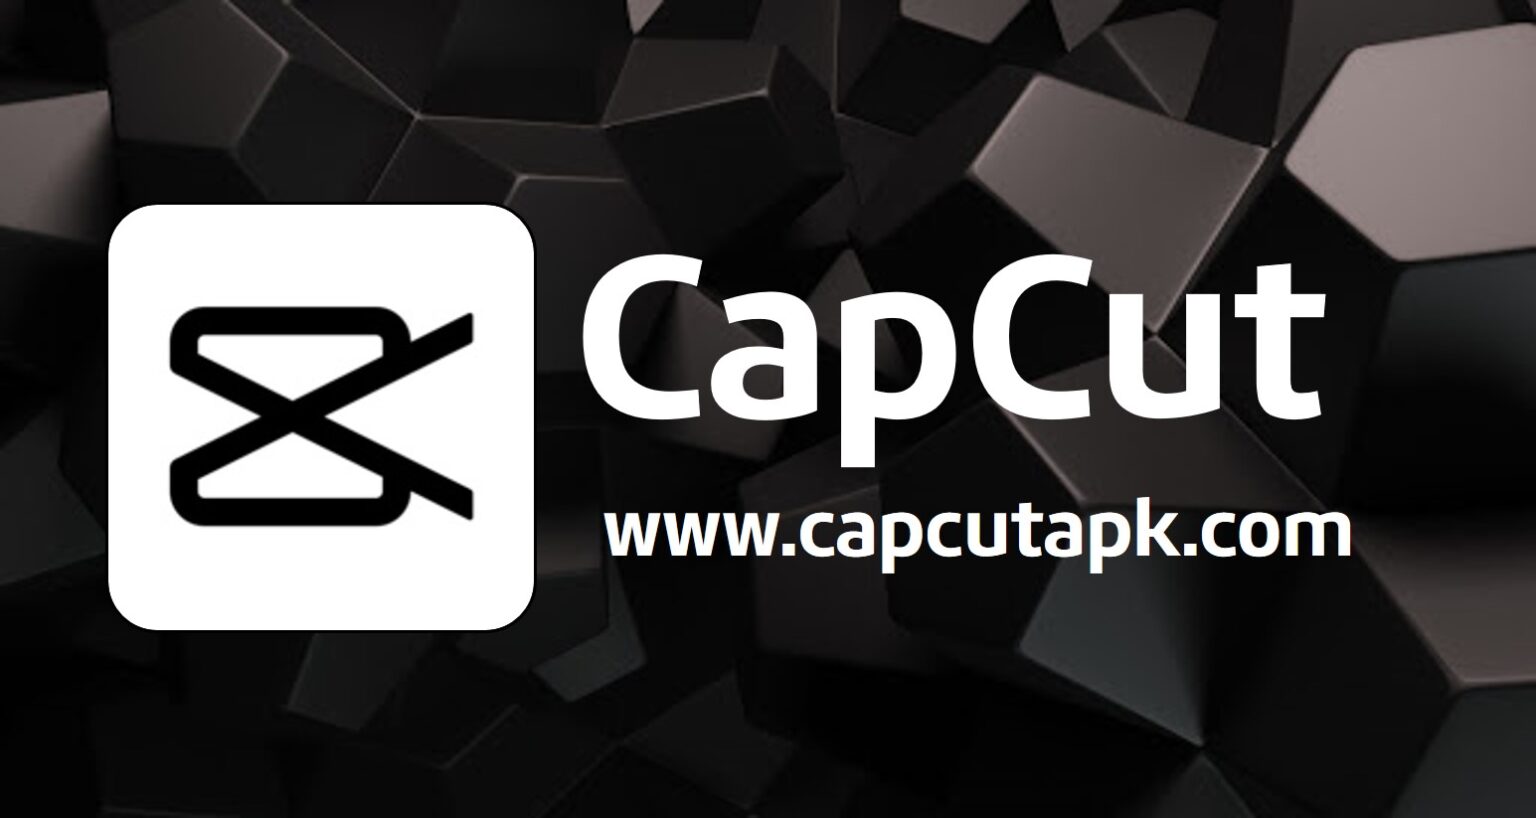 CapCut APK Download An easy way to edit and add effects to videos